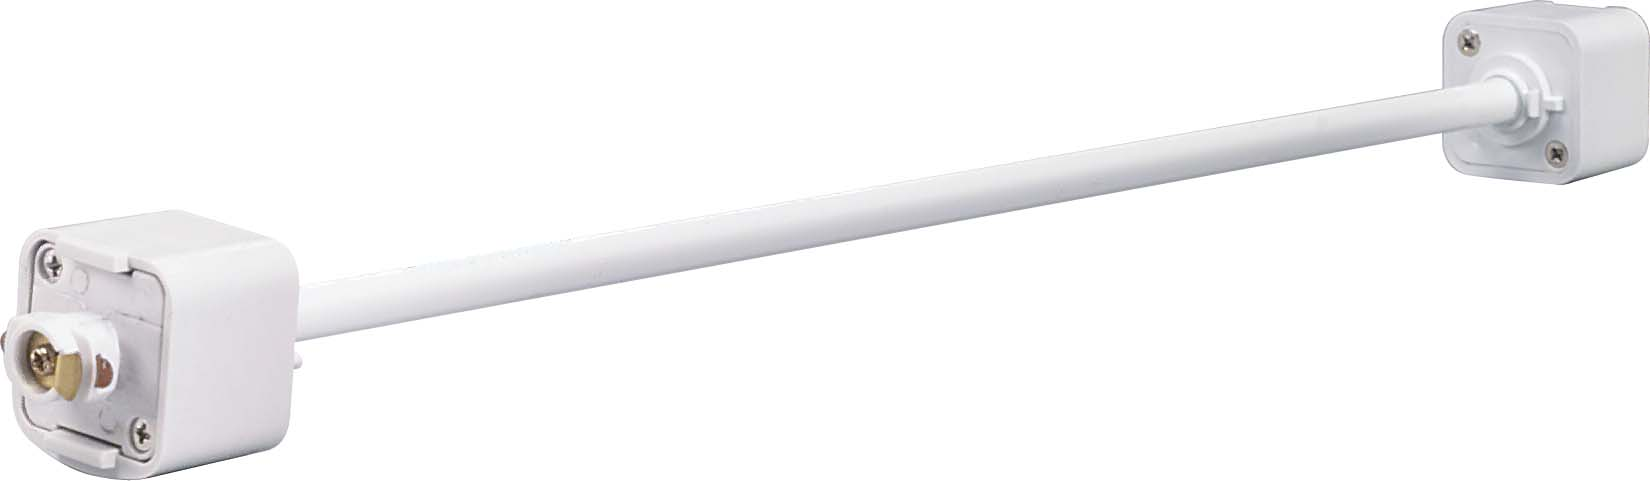 SATCO/NUVO 48 Inch Extension Wand White Finish (TP162)